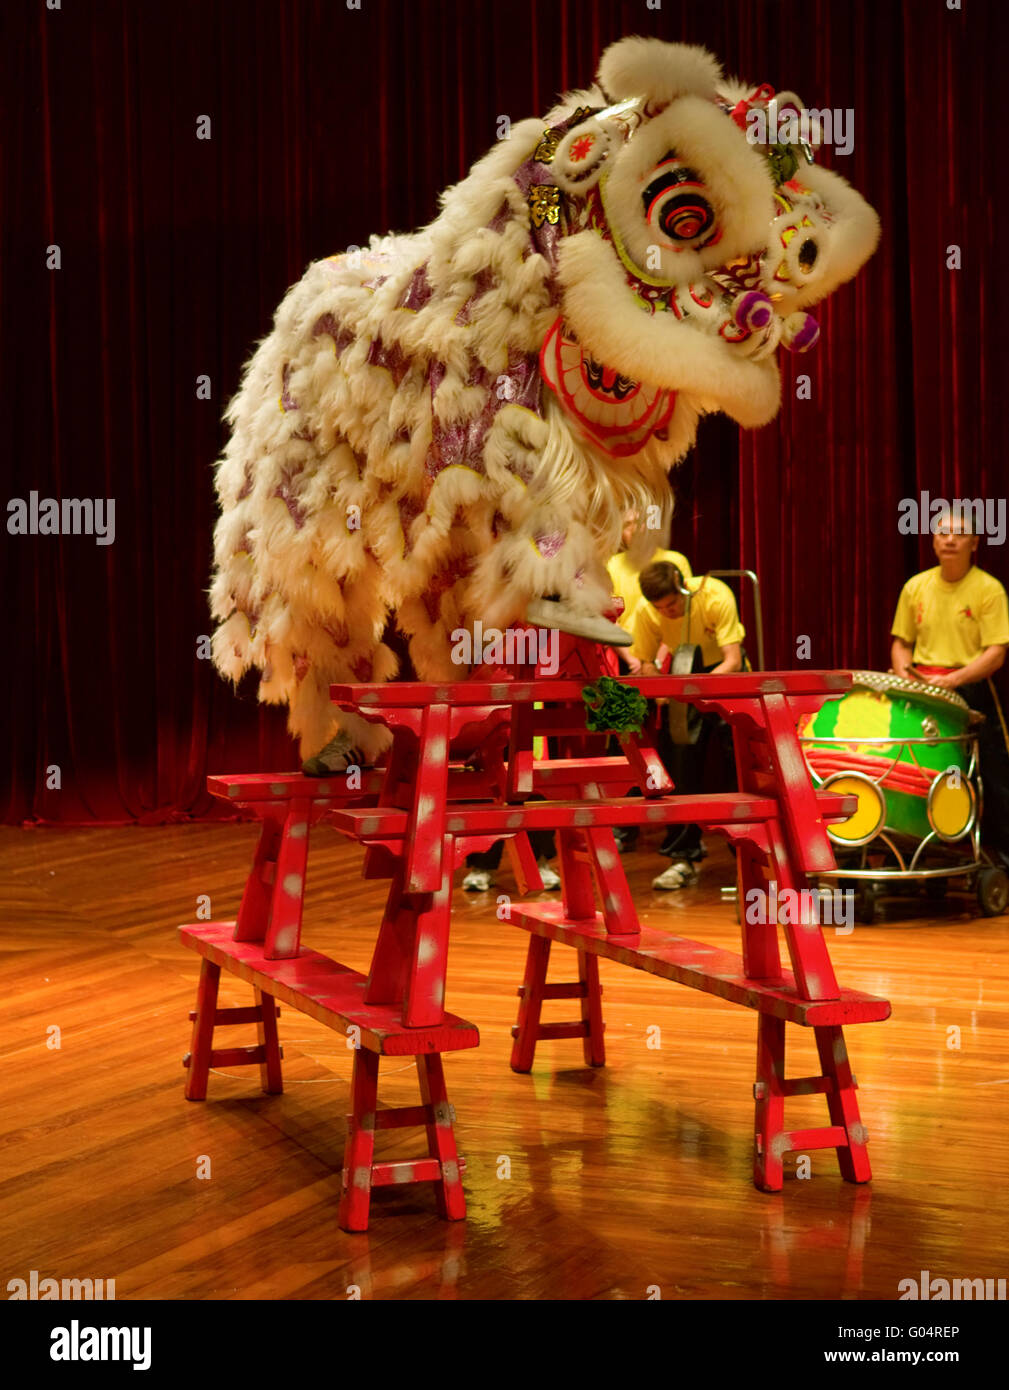 MACAU - APRIL 25: The traditional Chinese lion dance on stage Stock Photo